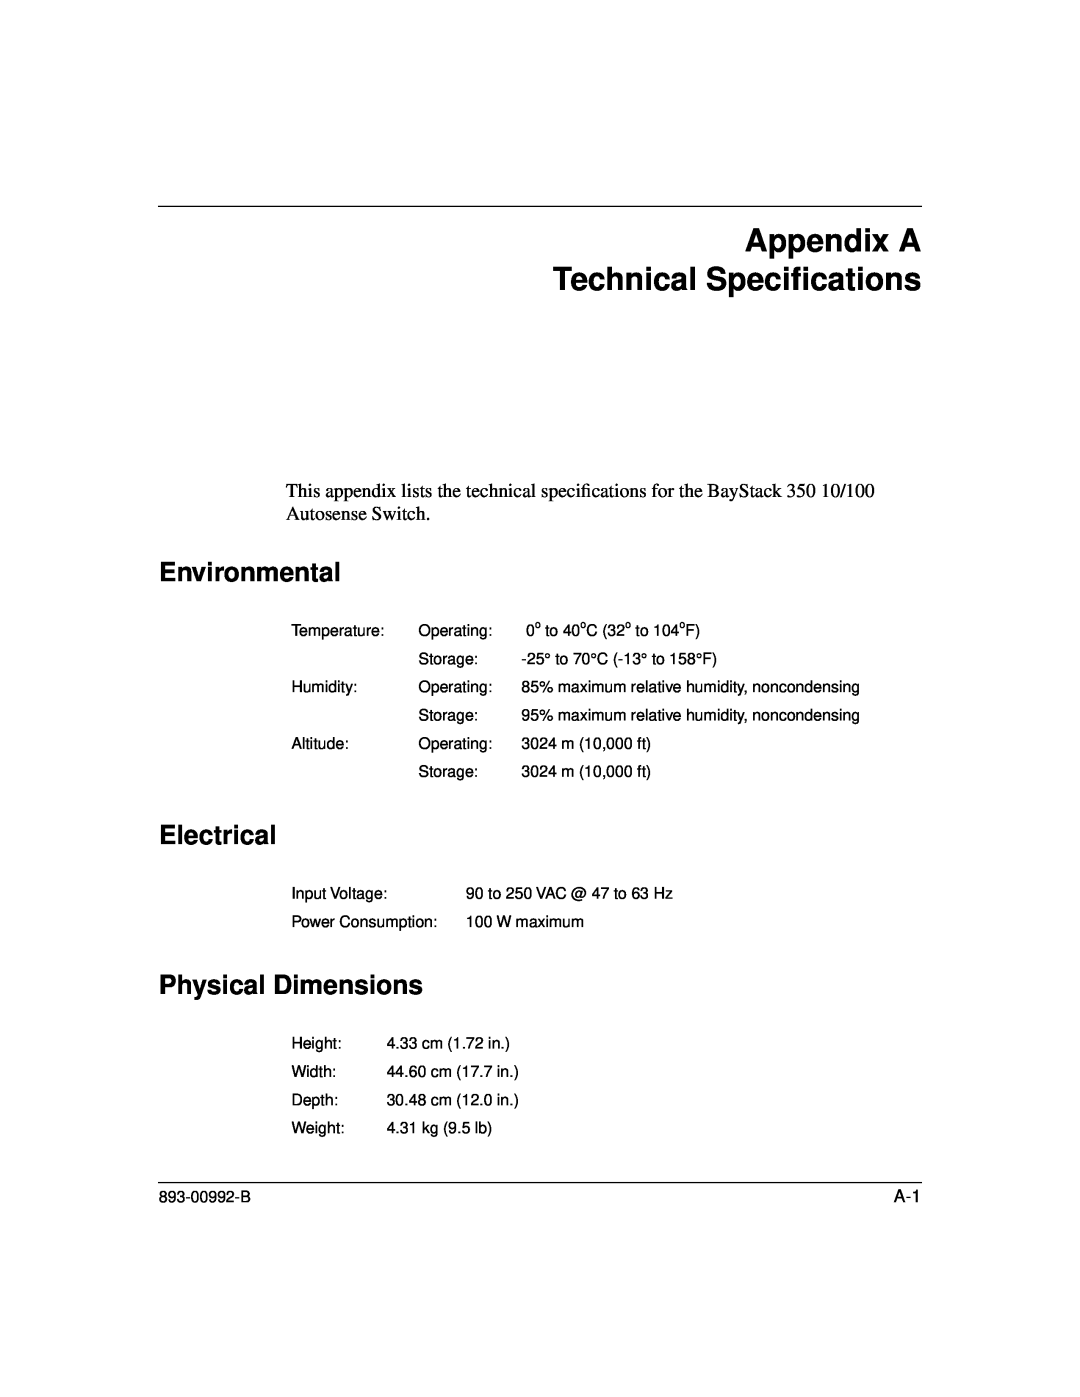 Bay Technical Associates 350 manual Appendix A Technical Speciﬁcations, Environmental, Electrical, Physical Dimensions 